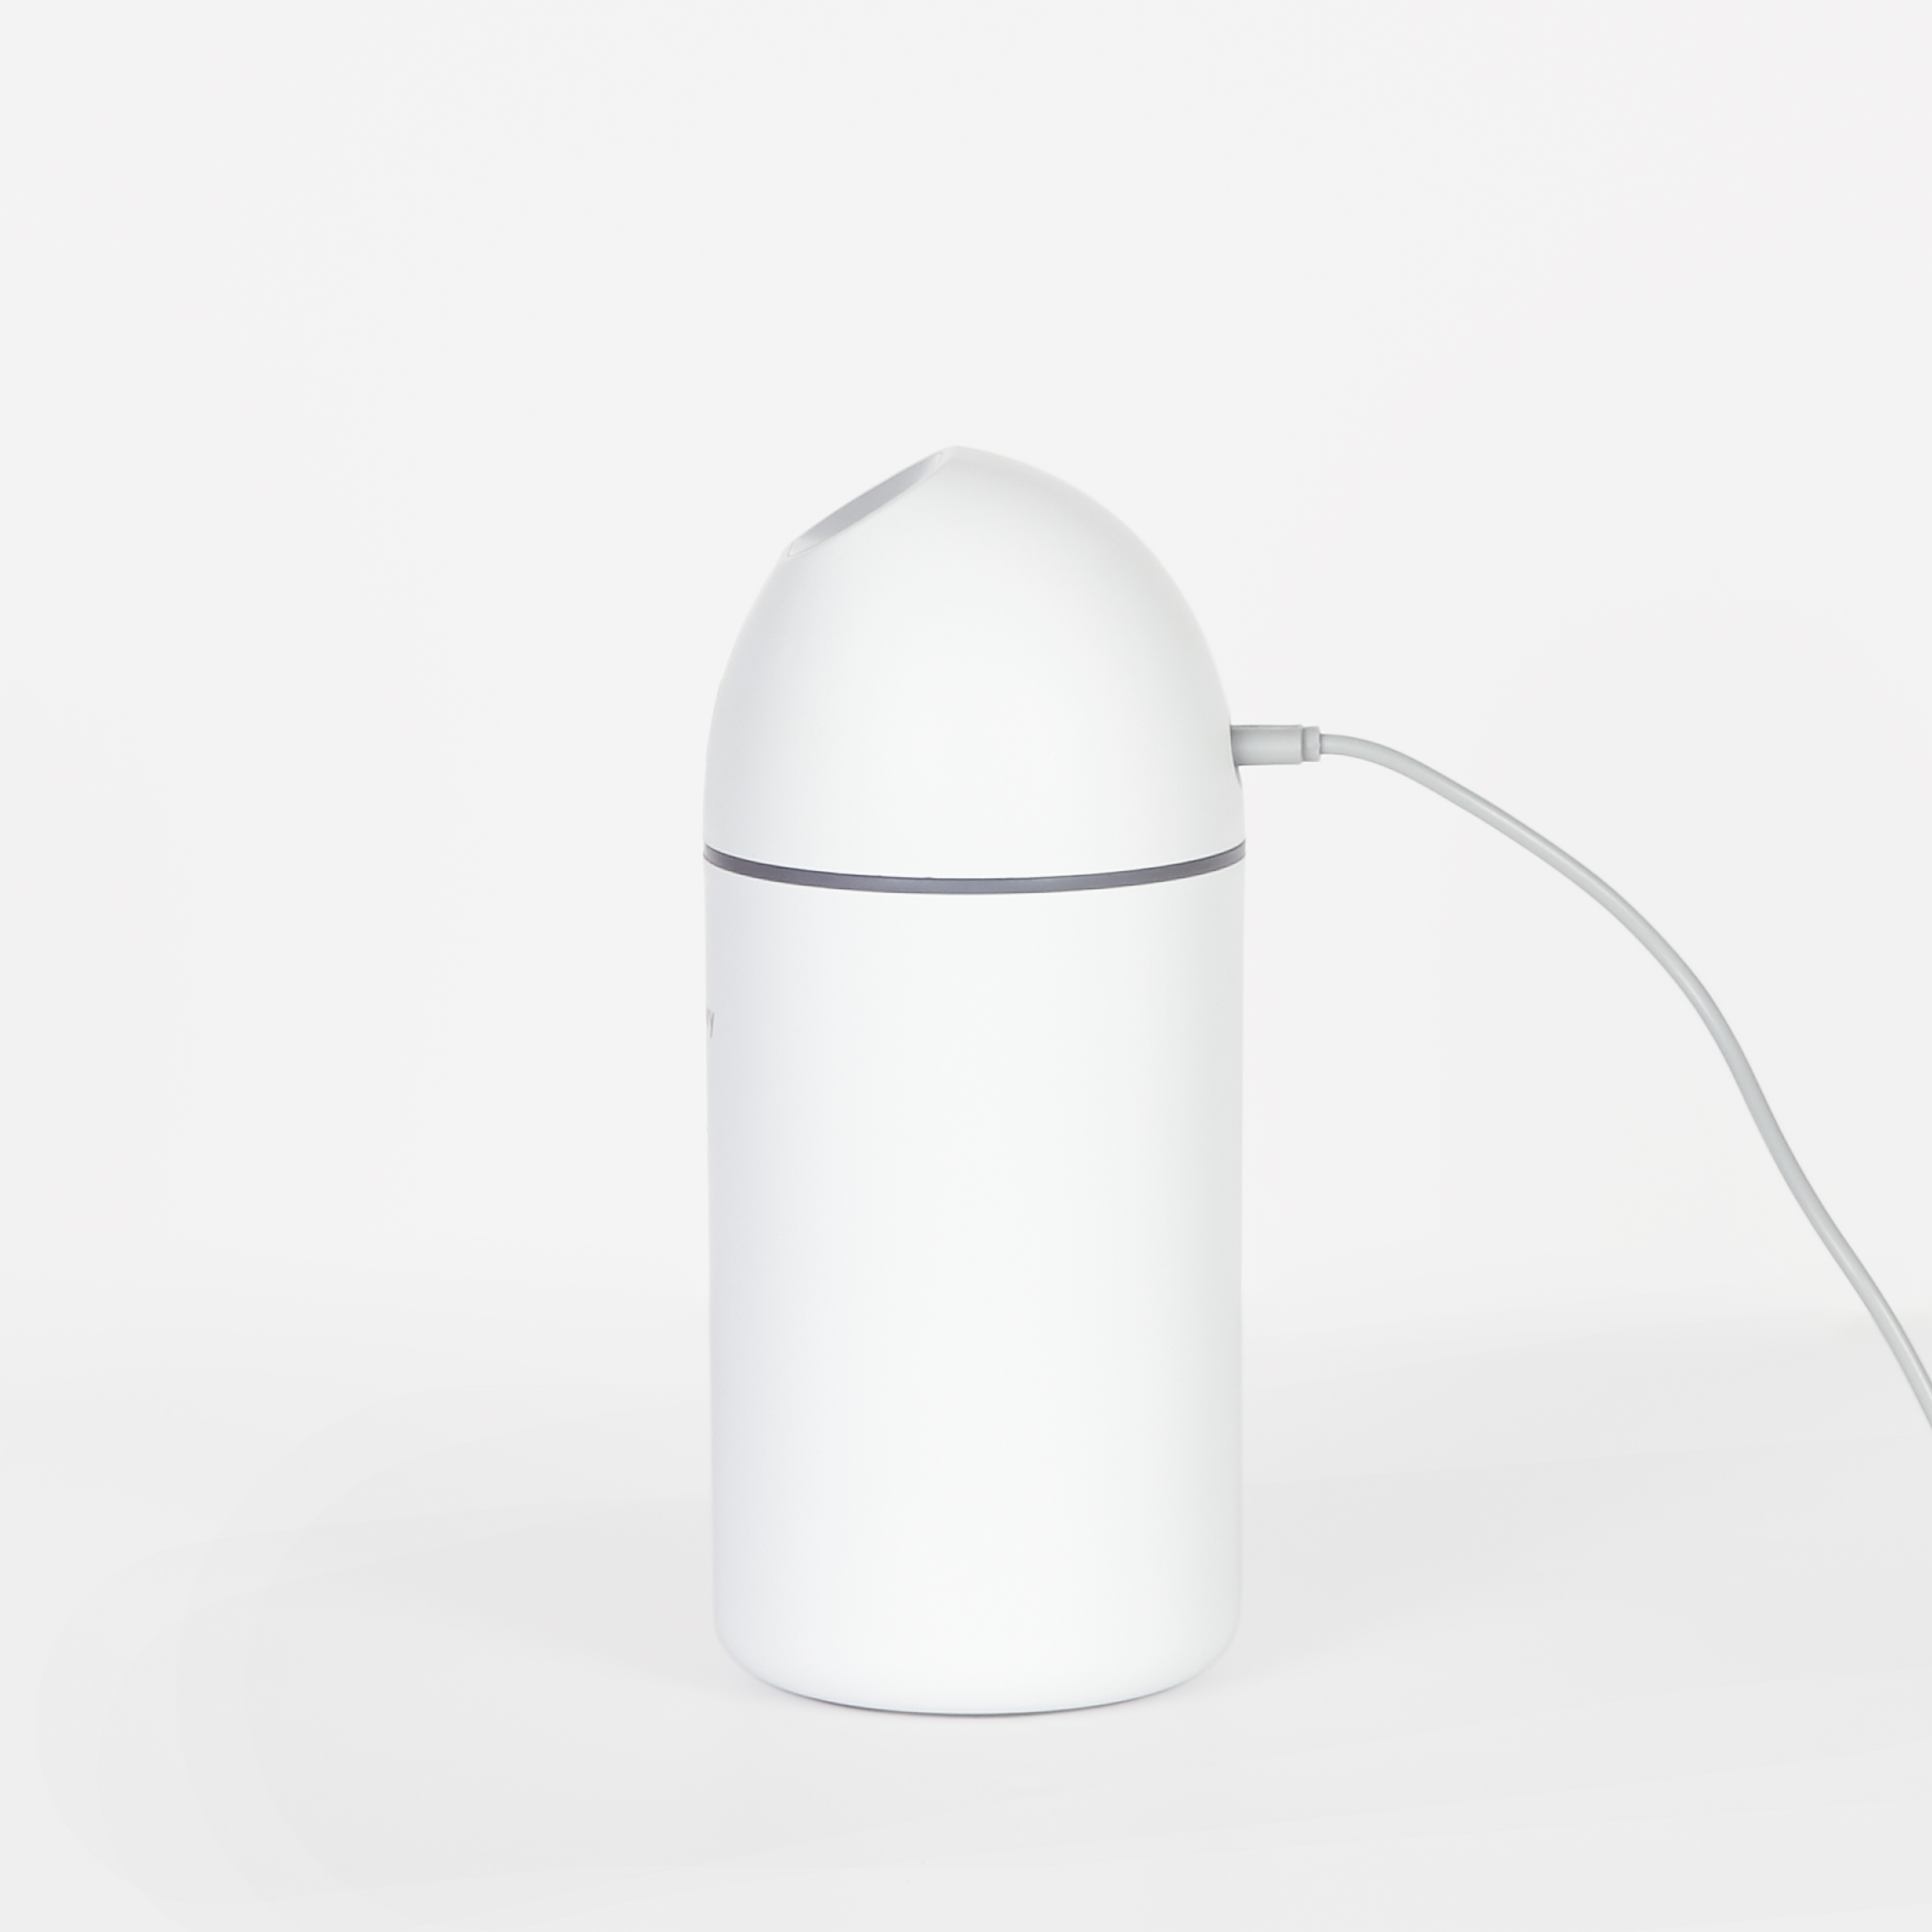 Hey Dewy Portable Facial Humidifier (Wired Version)